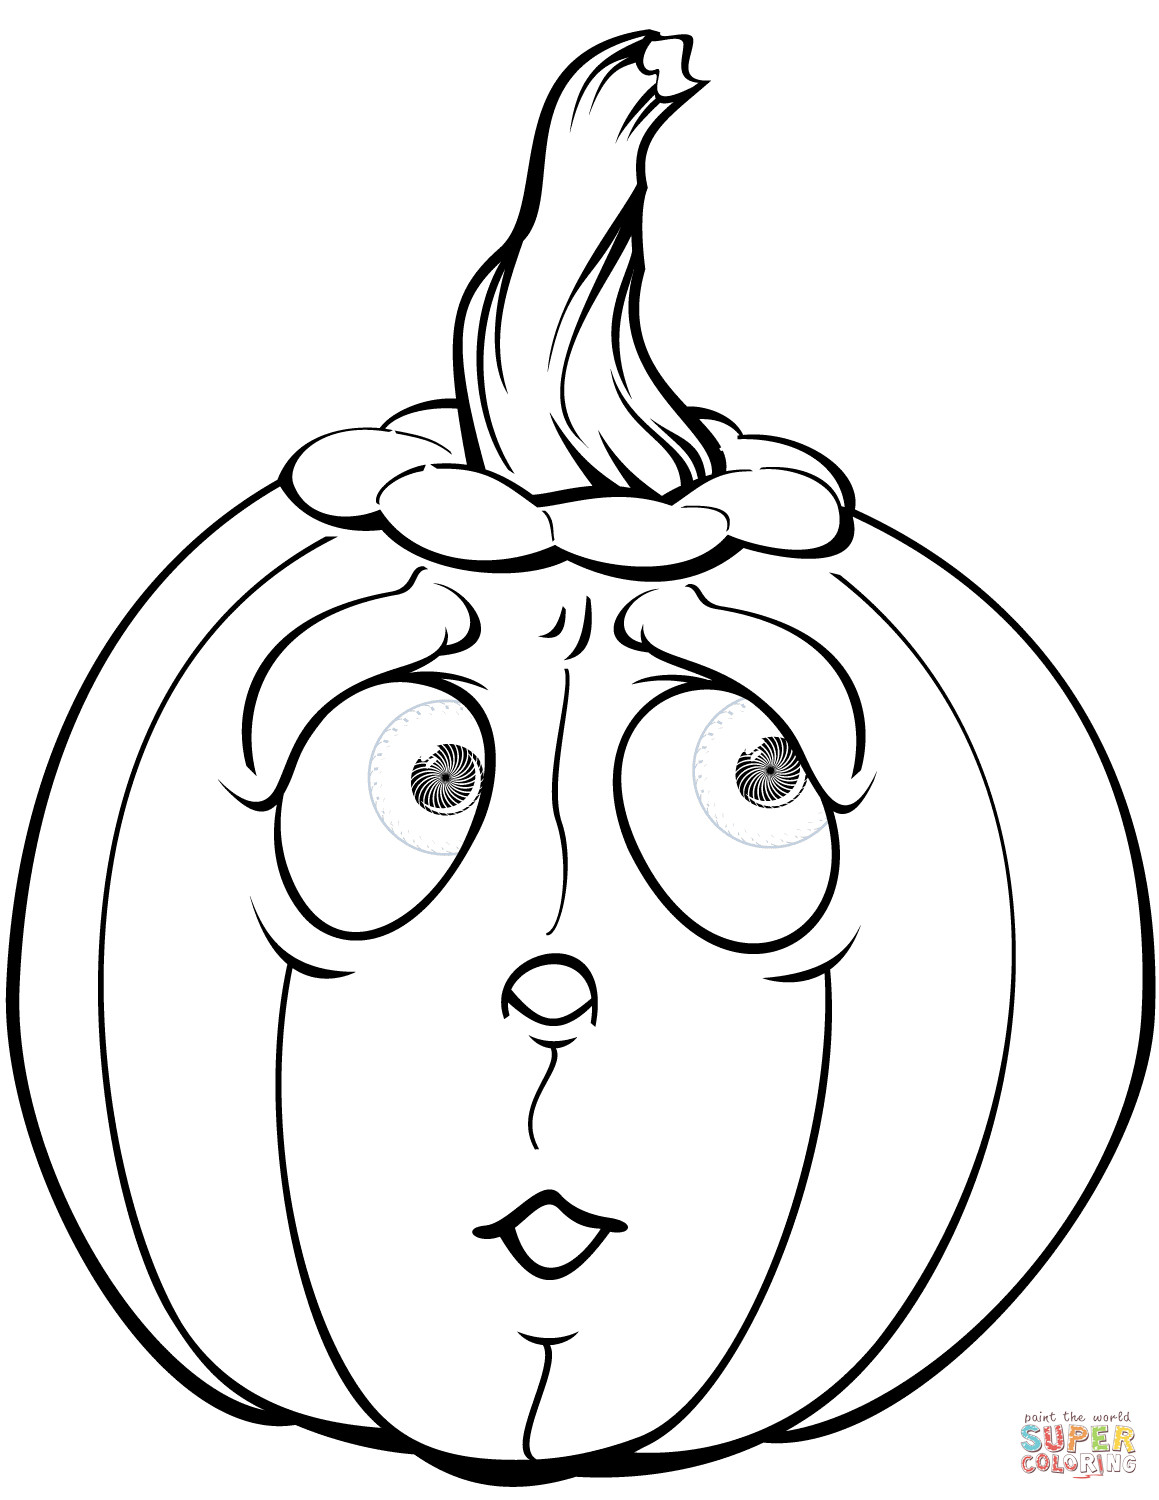 Pumpkin Printable Coloring Pages
 Scared Pumpkin coloring page